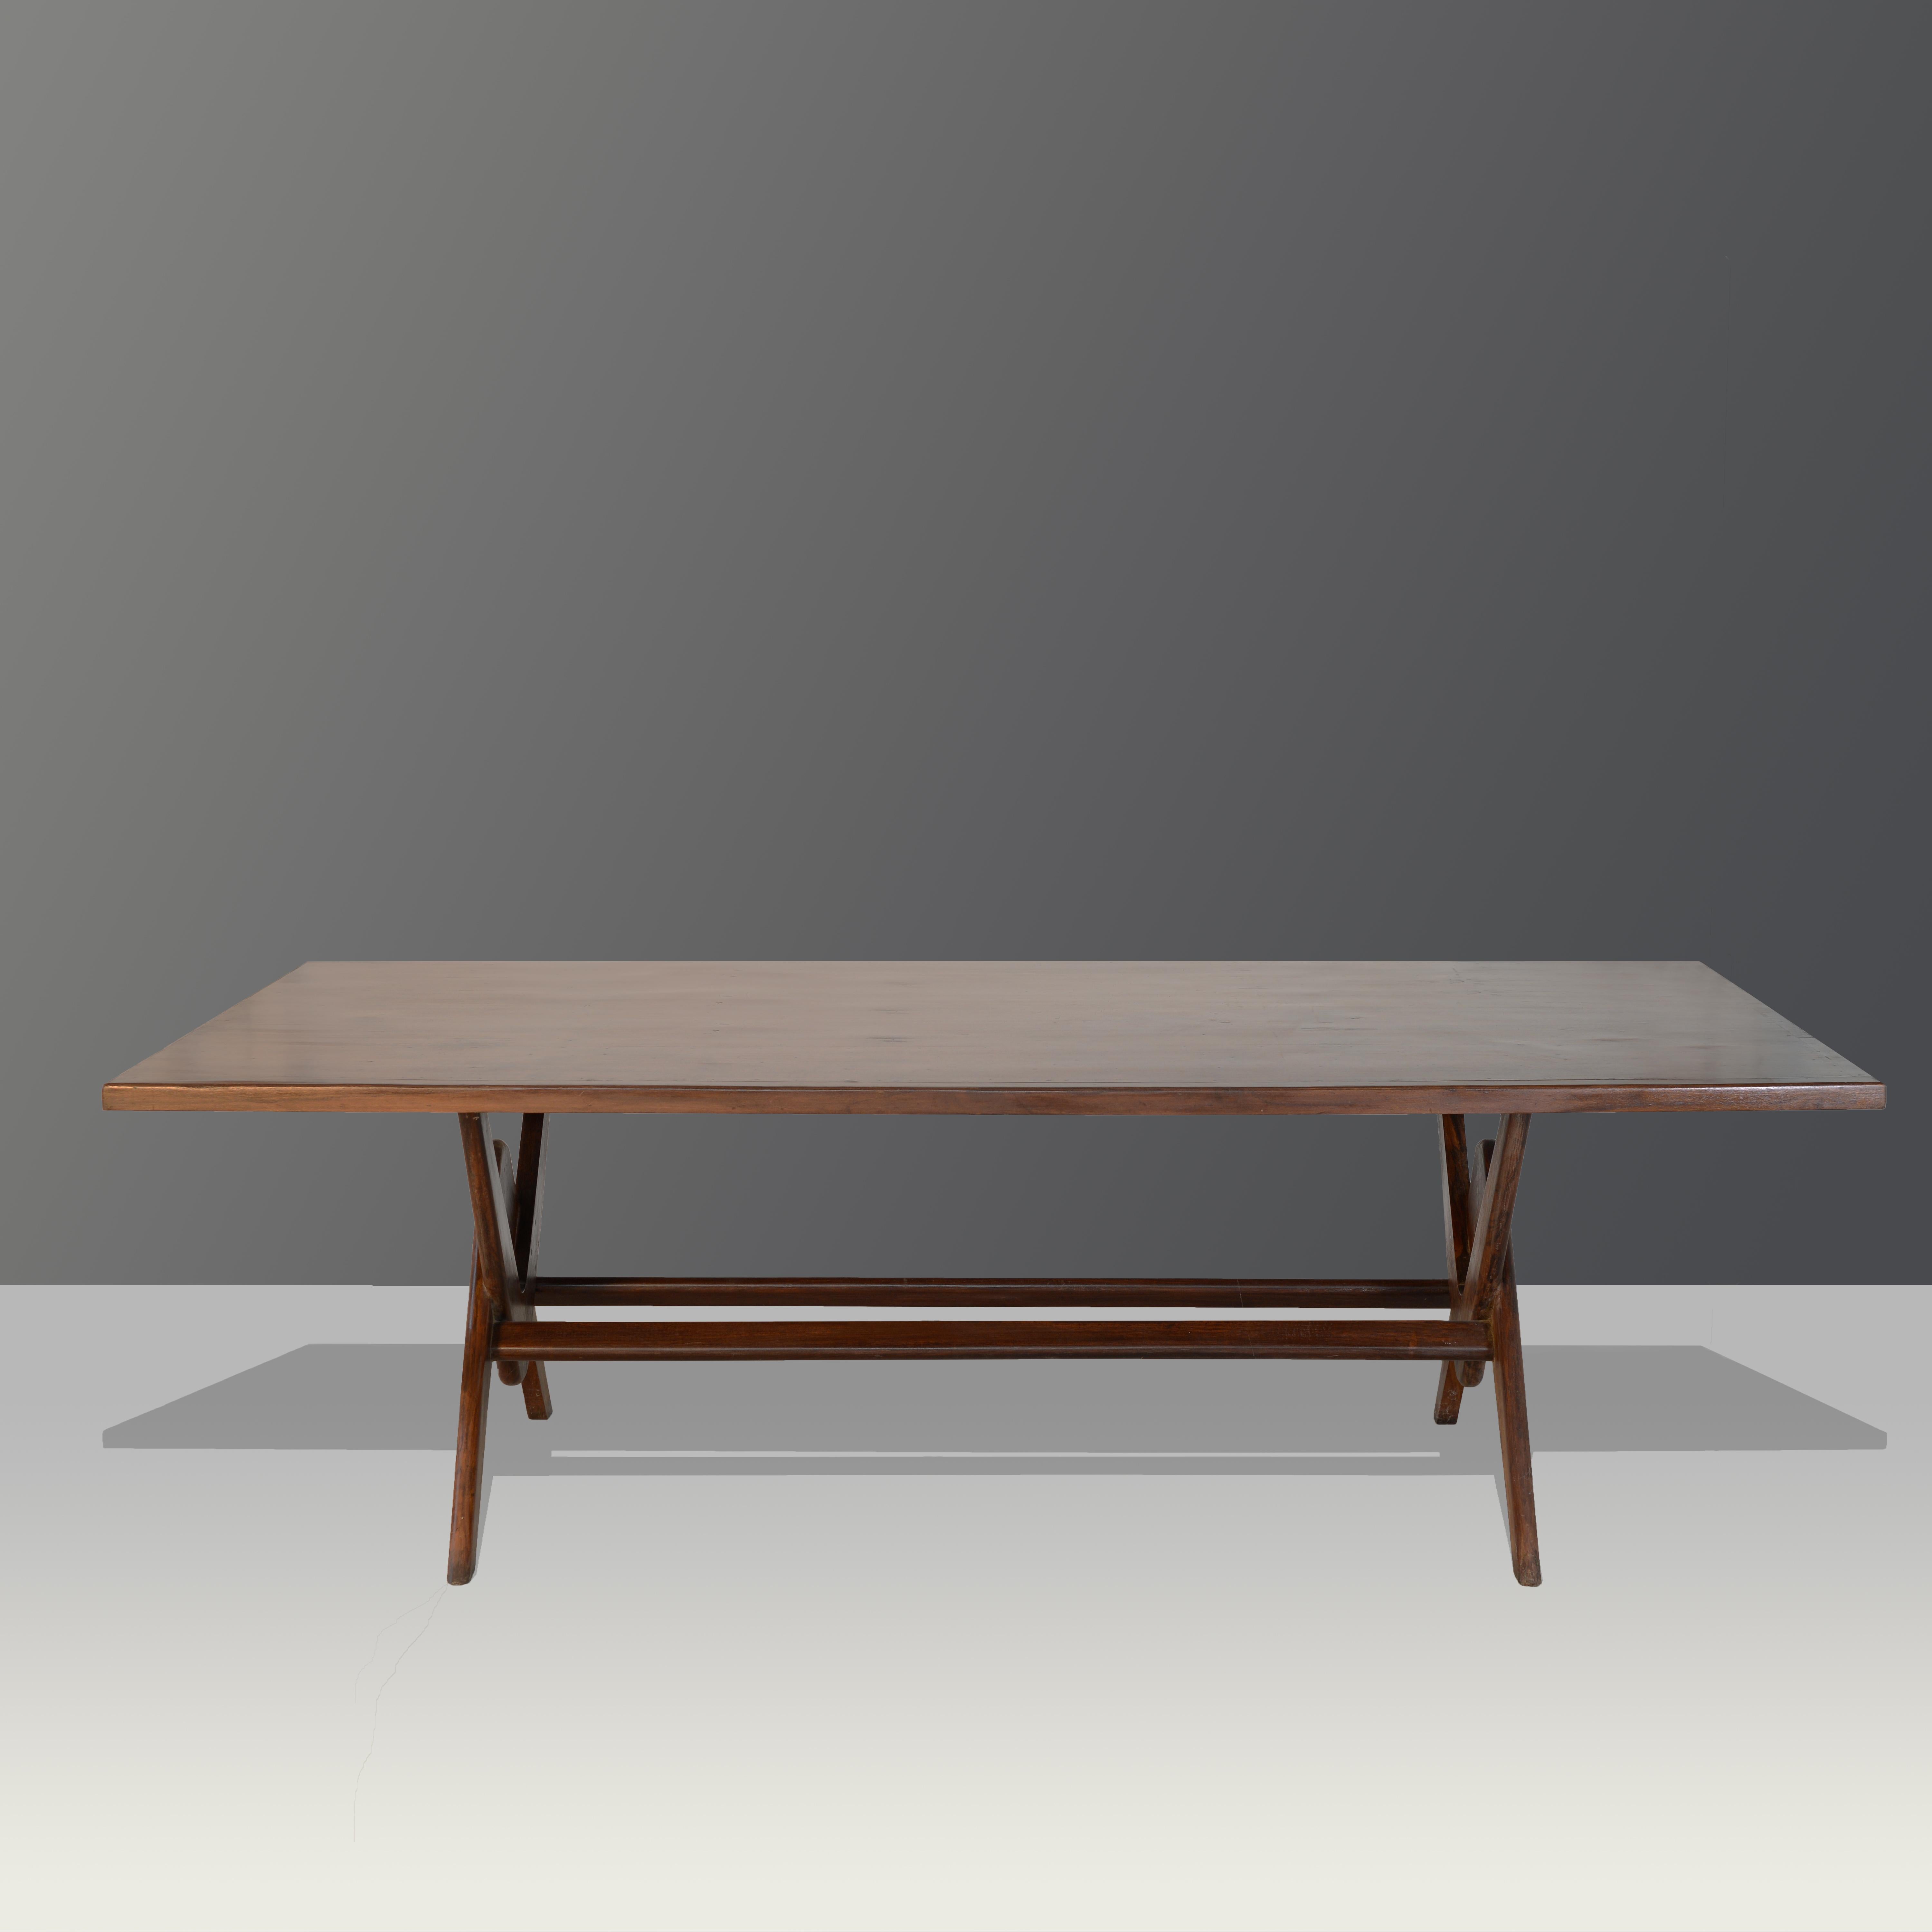 LC/PJ-TAT-14-A Boomerang Table / Authentic Mid-Century Modern In Good Condition For Sale In Zürich, CH